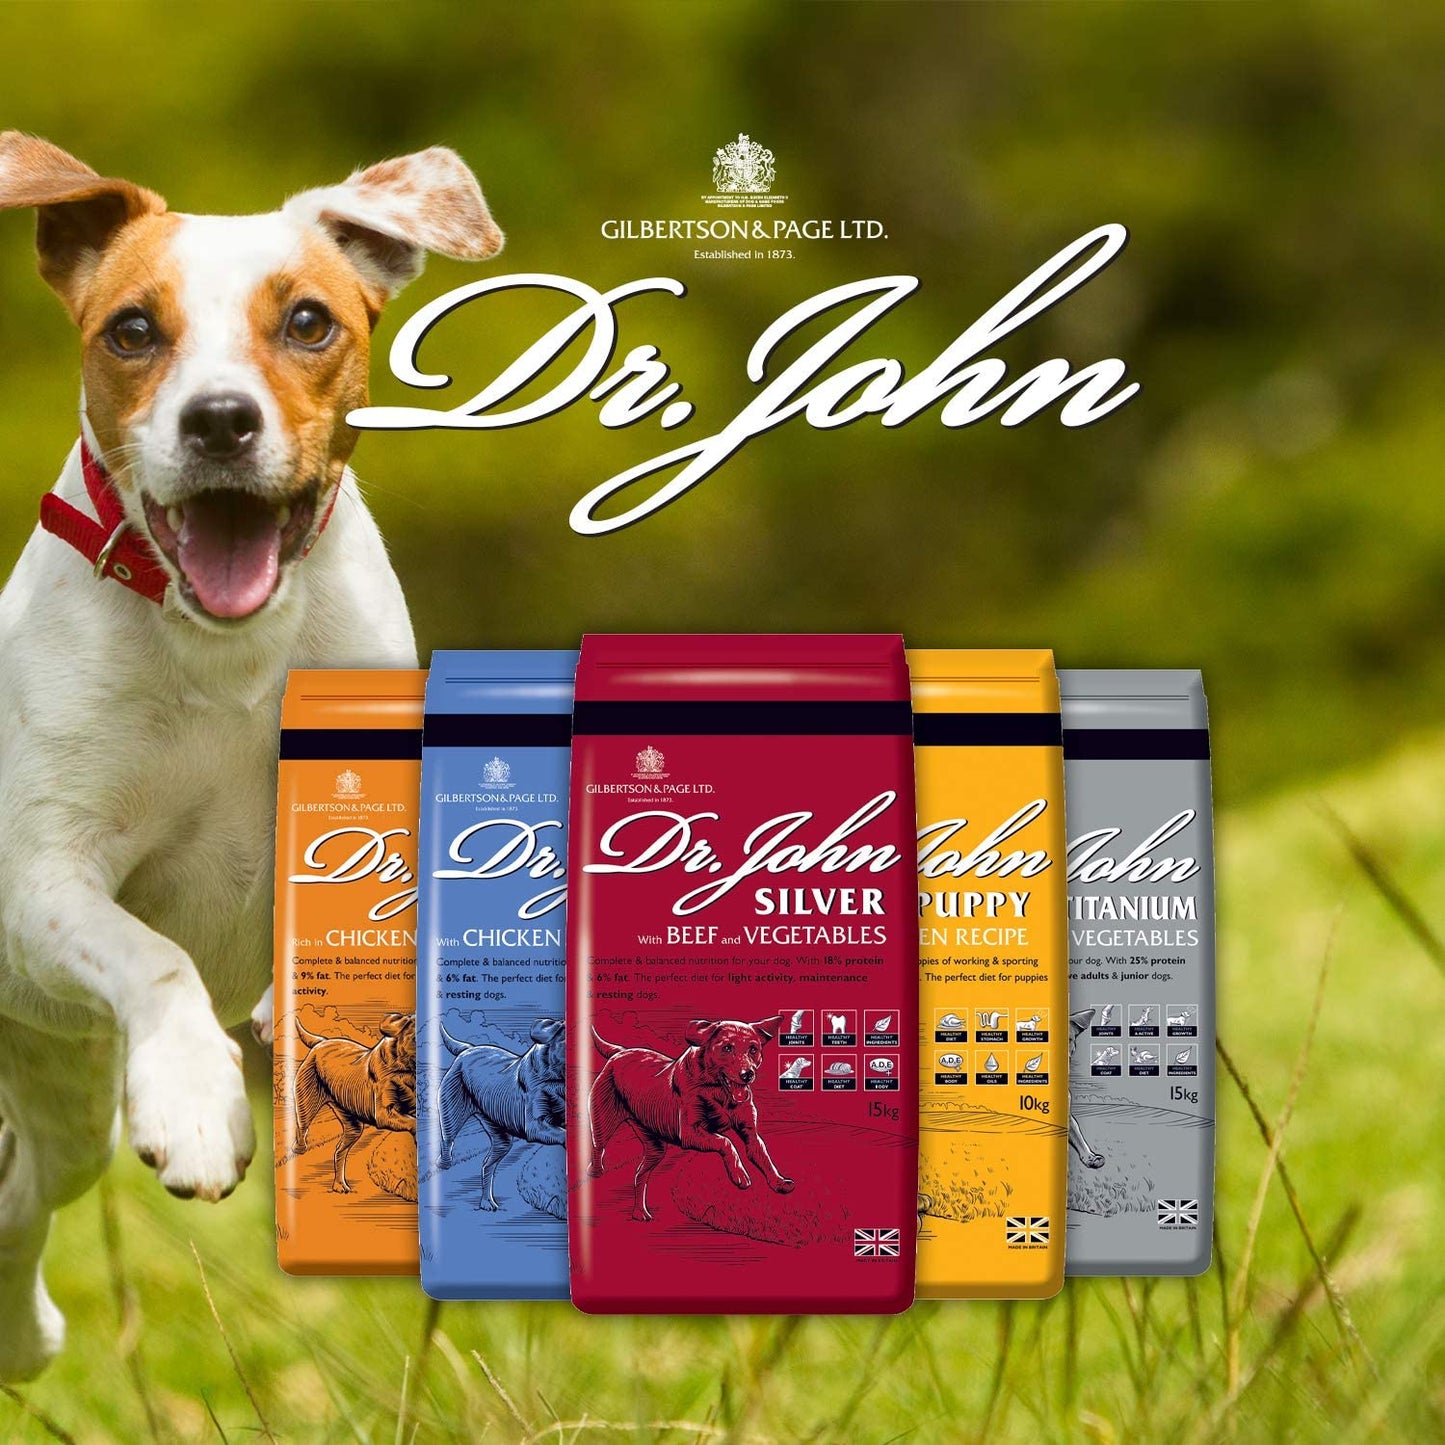 Dr John GOLD Rich in CHICKEN with VEGETABLES 15 kg - Premium Dog Food from Gilbertson & Page - Just $32.50! Shop now at Gilbertson & Page Europe